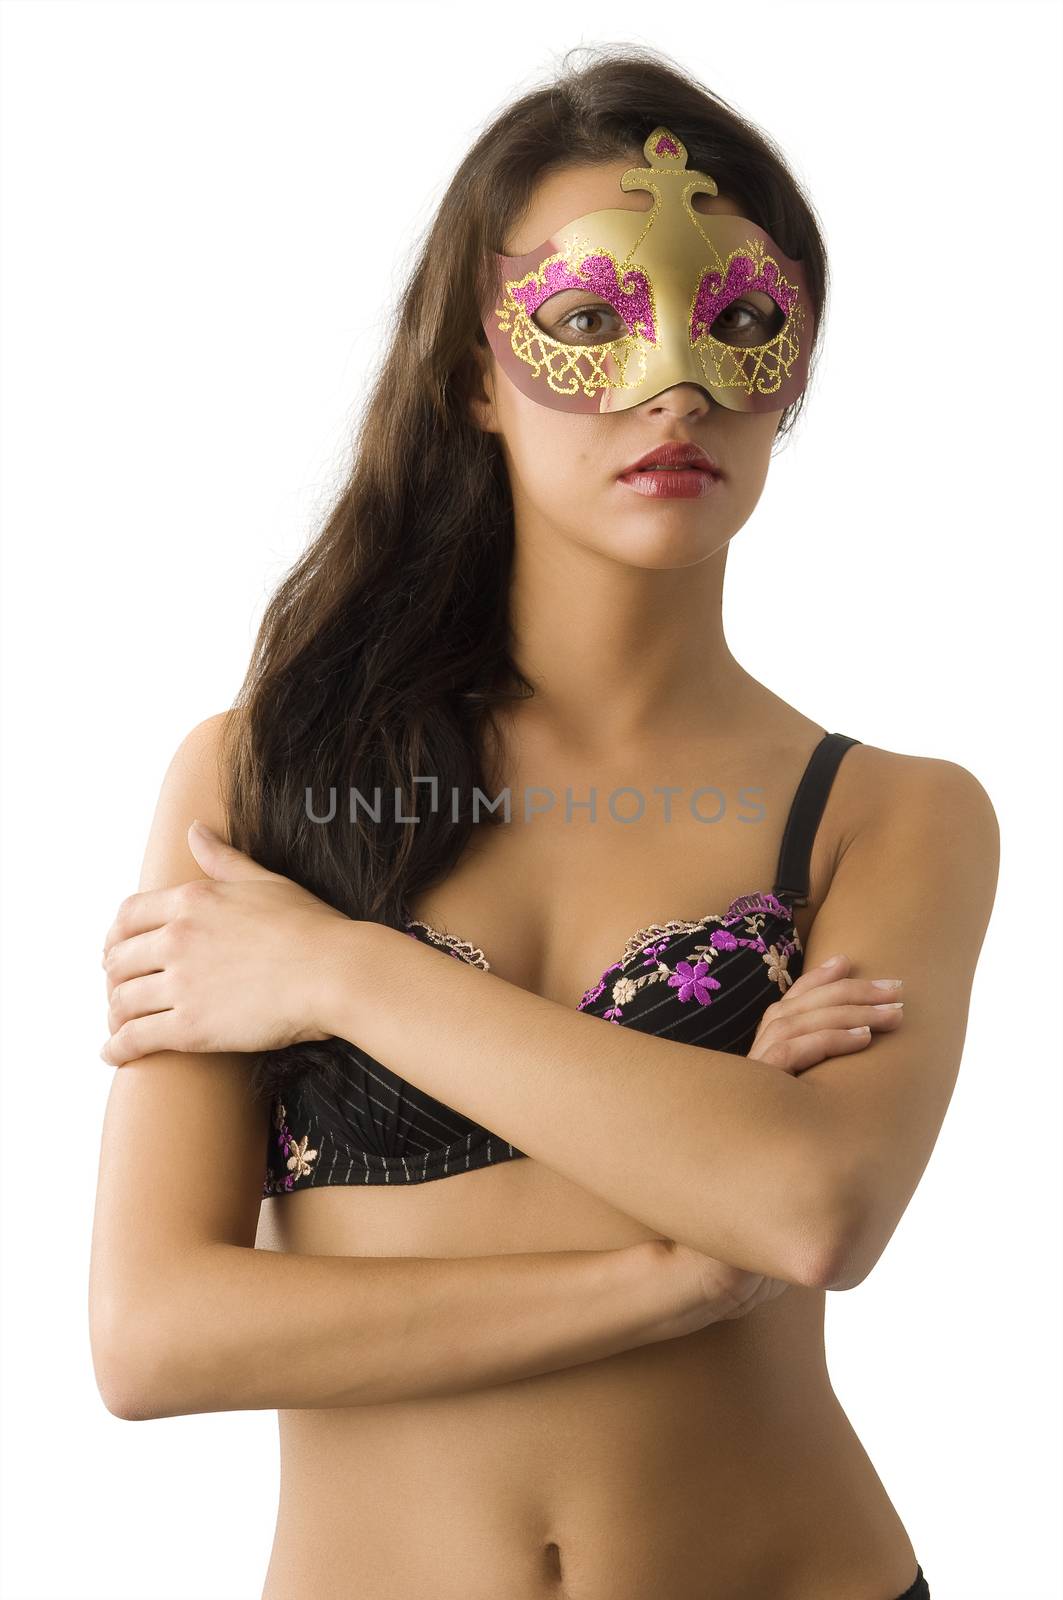 very nice girl with long hair in bra and carnival mask looking in camera